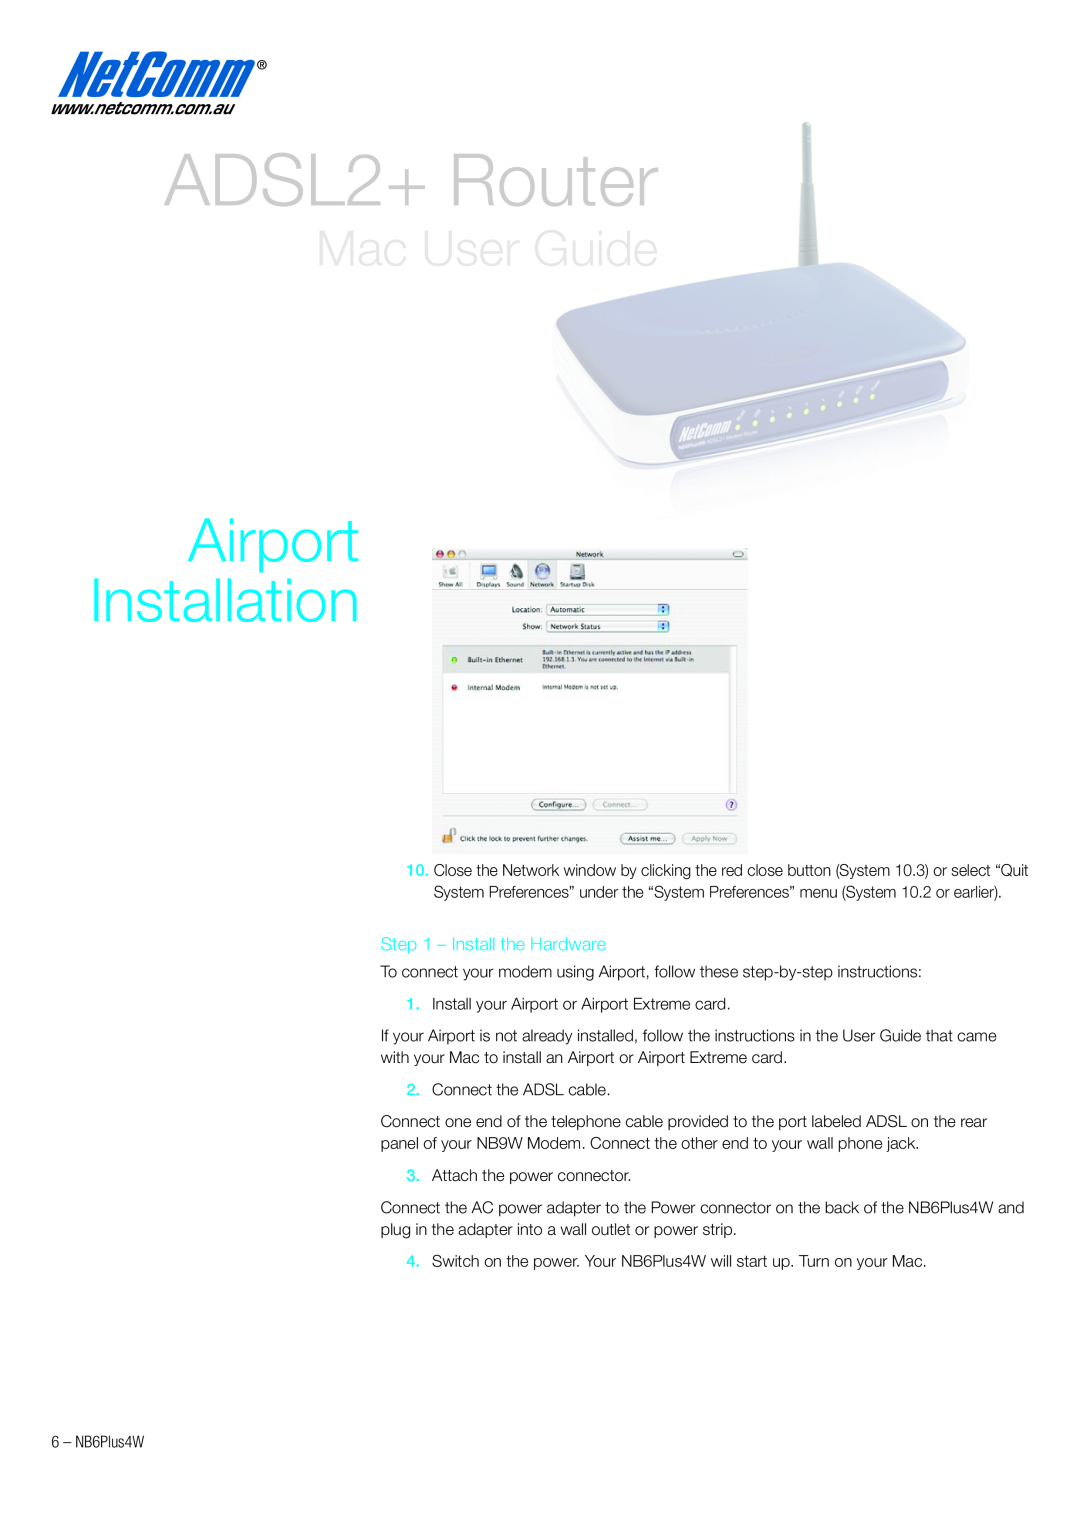 NetComm NB6PLUS4W quick start Airport Installation, ADSL2+ Router, Mac User Guide, Install the Hardware 